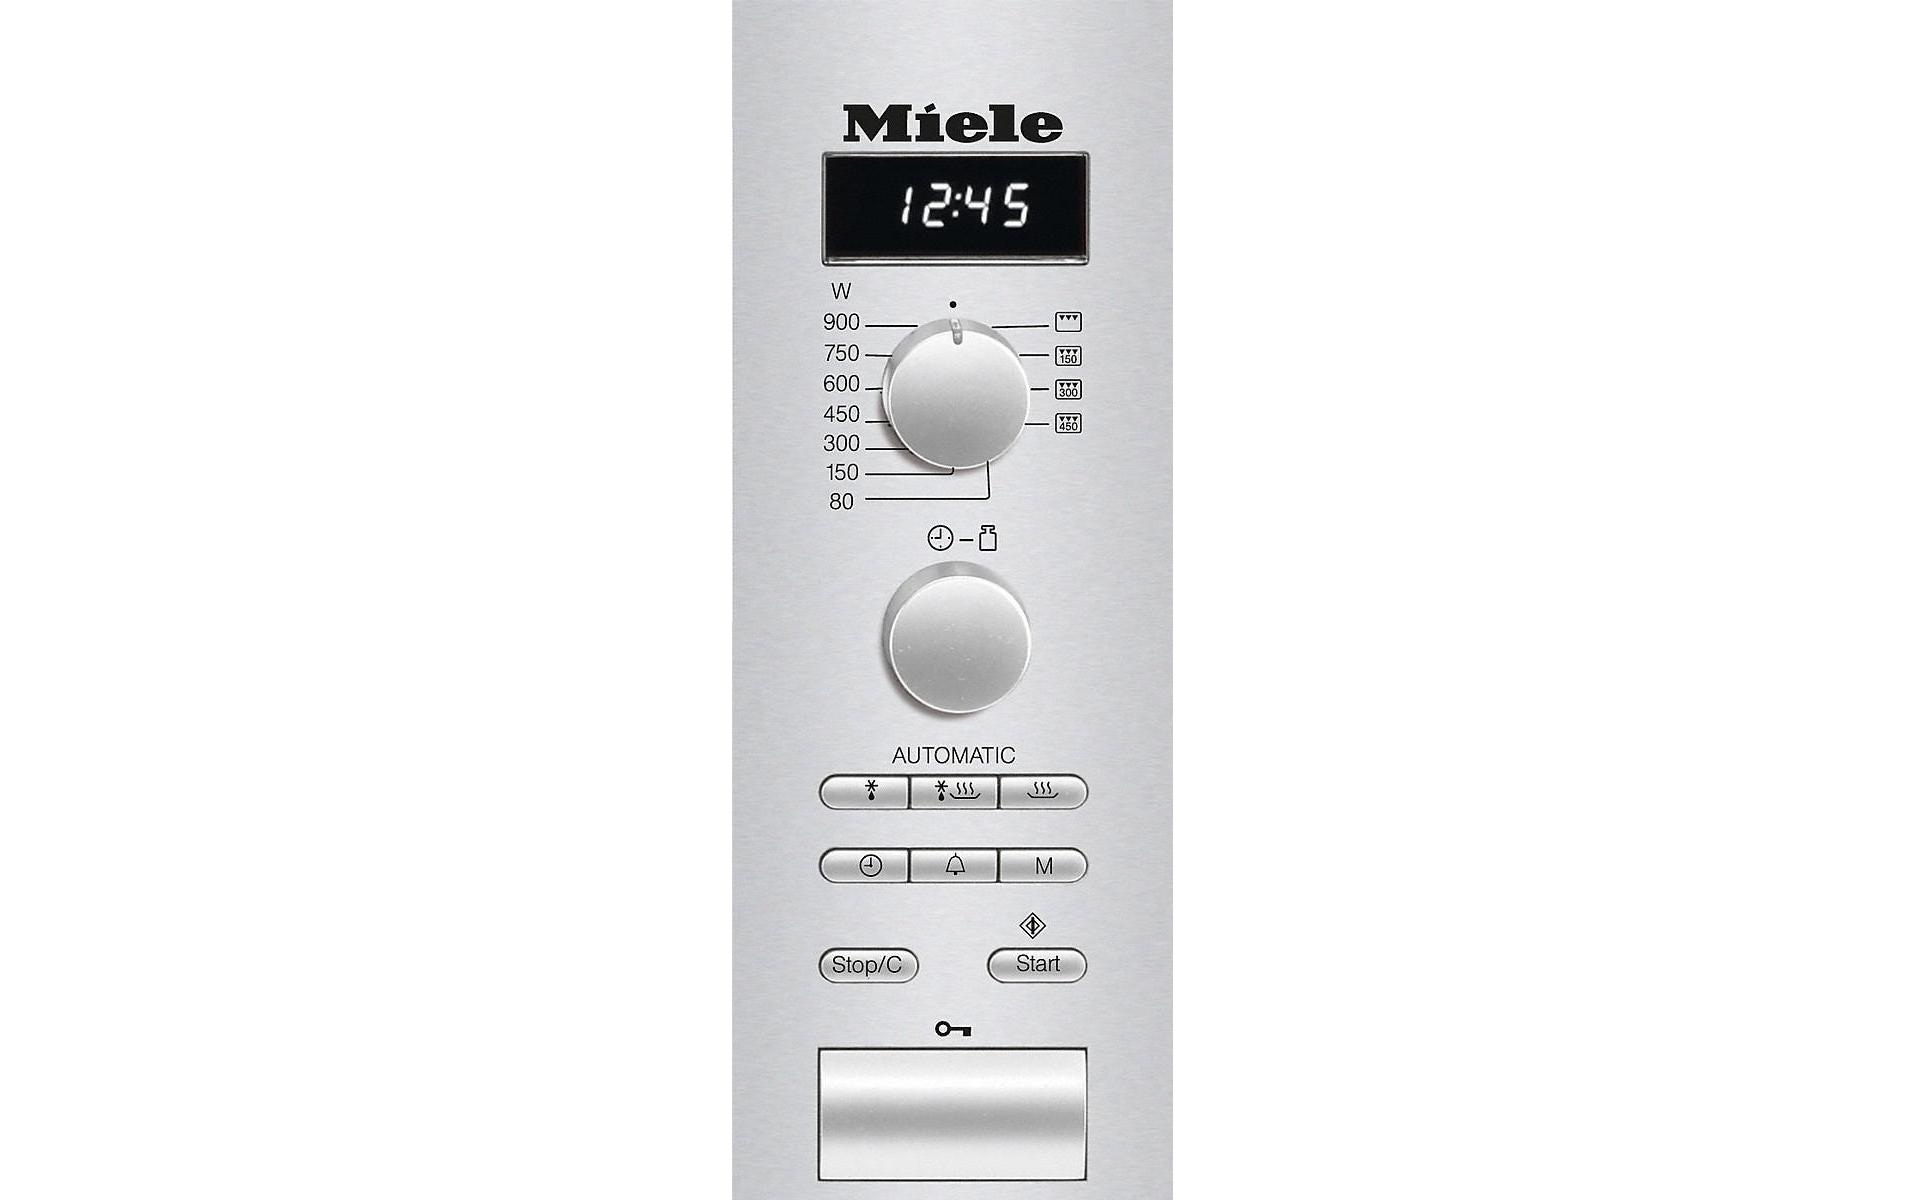 Miele Mikrowelle »mit Grill M 6012 S«, 800 W